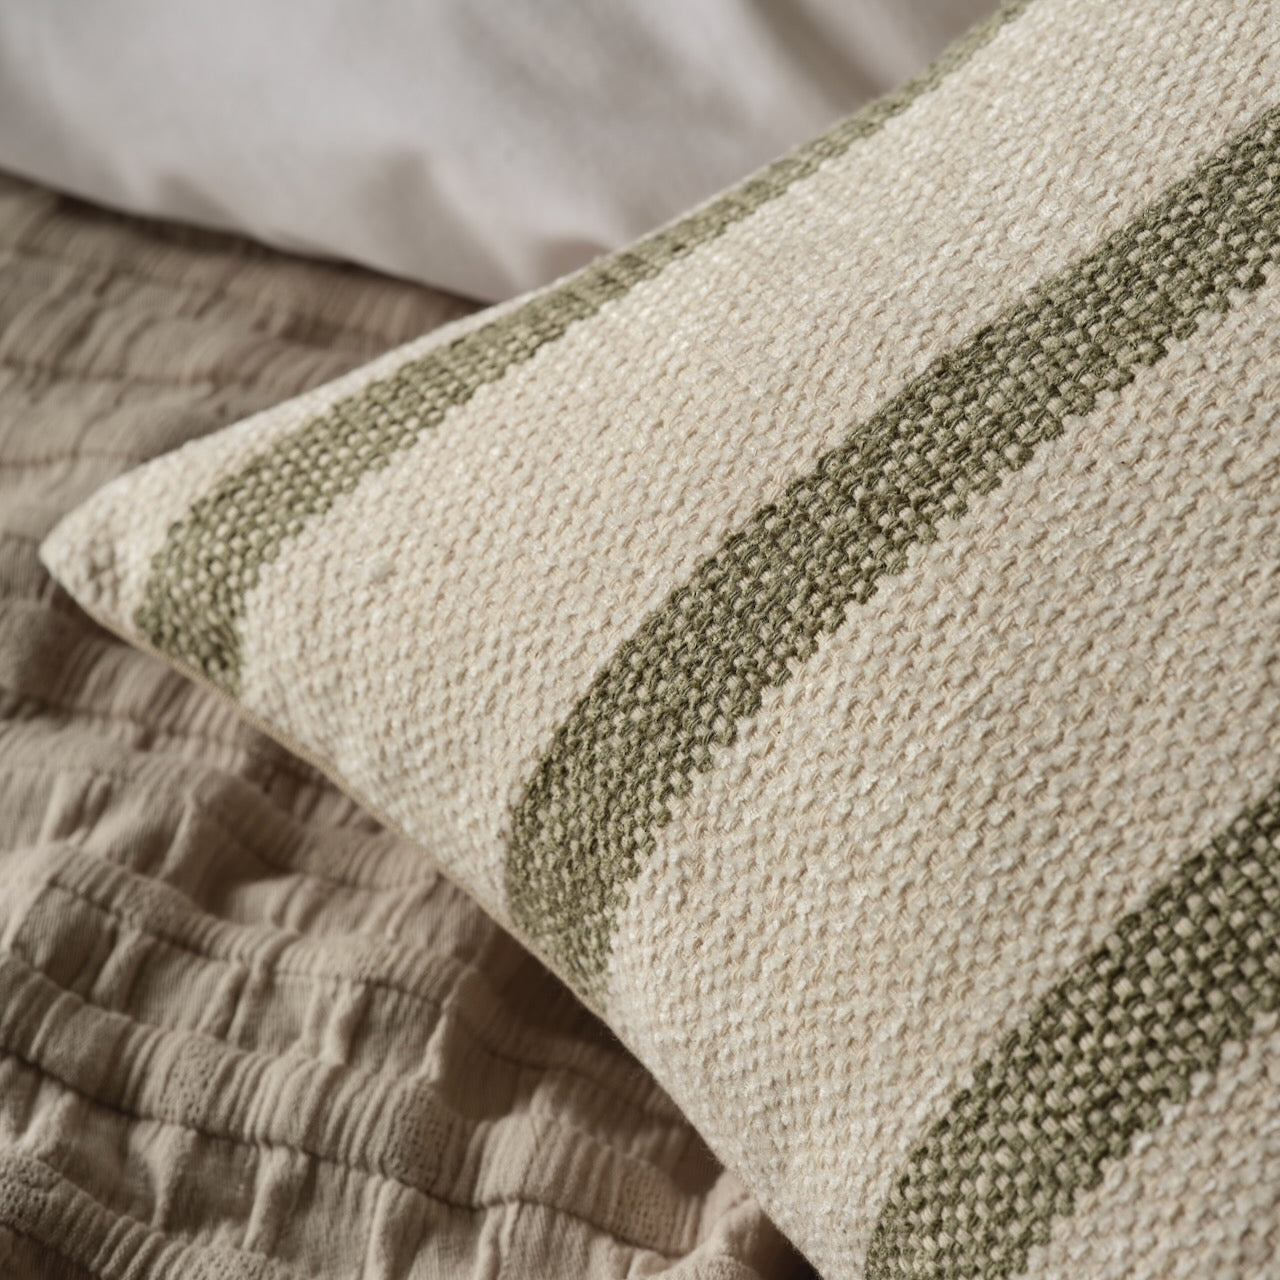 Detail of Cream & Green Stripe Cushion Cover by Layered Lounge which shows the lovely texture.